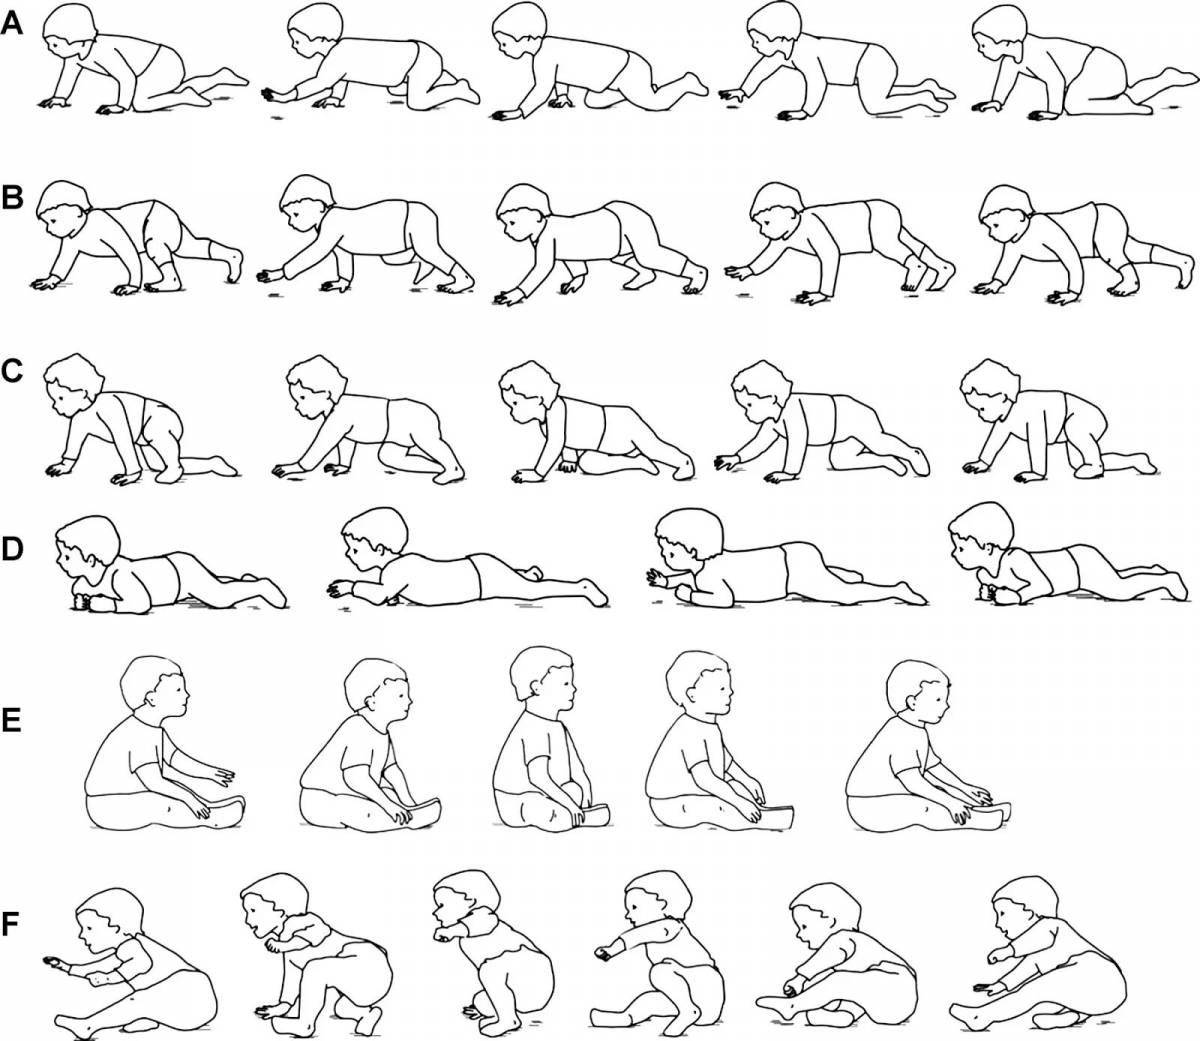 Kama Sutra funny coloring book